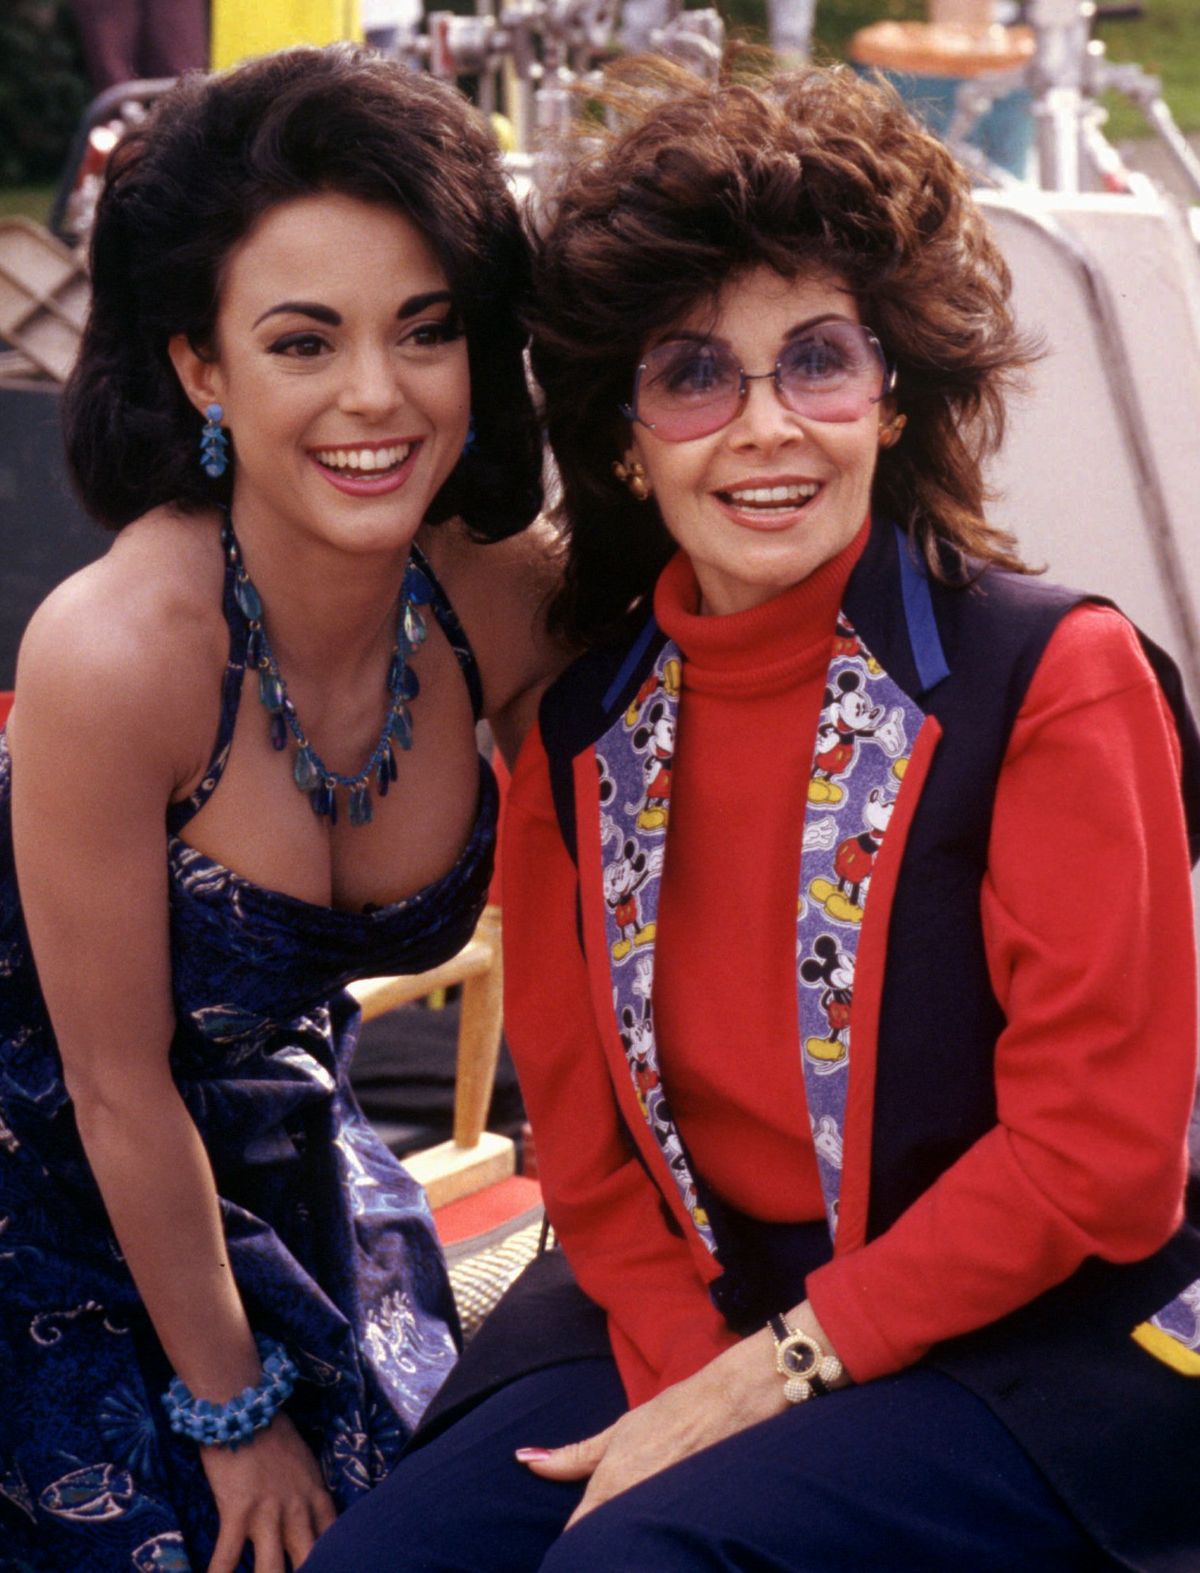 In this 1995 photo, actresses Annette Funicello, right, and Eva LaRue are seen together during the filming of the CBS-TV movie "A Dream is a Wish Your Heart Makes," which spans Funicello